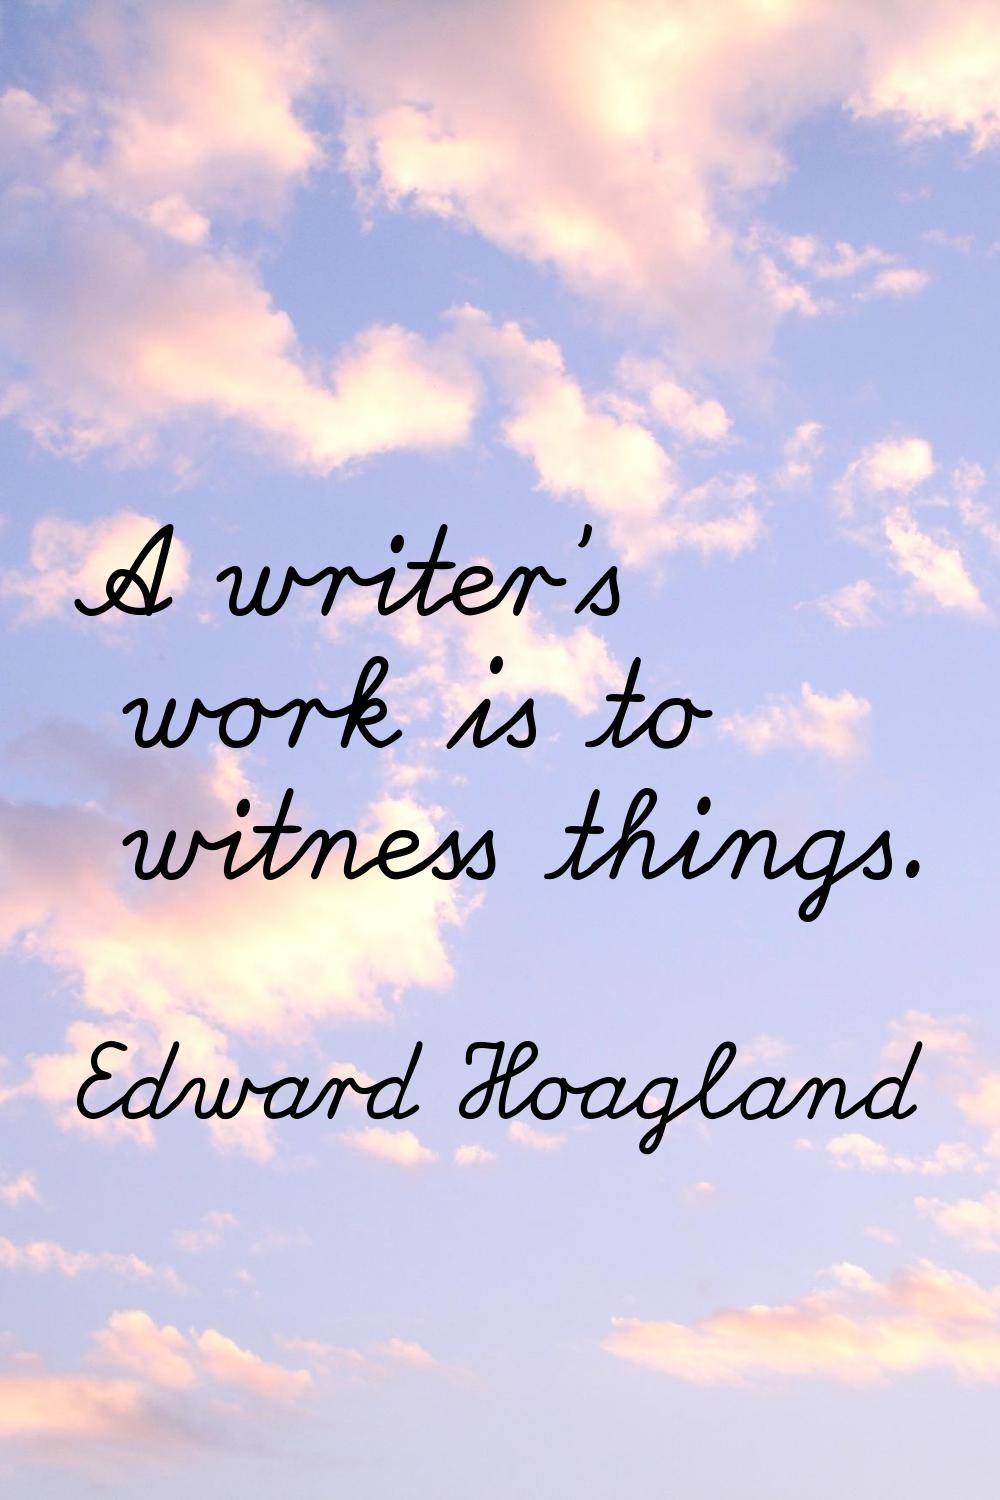 A writer's work is to witness things.